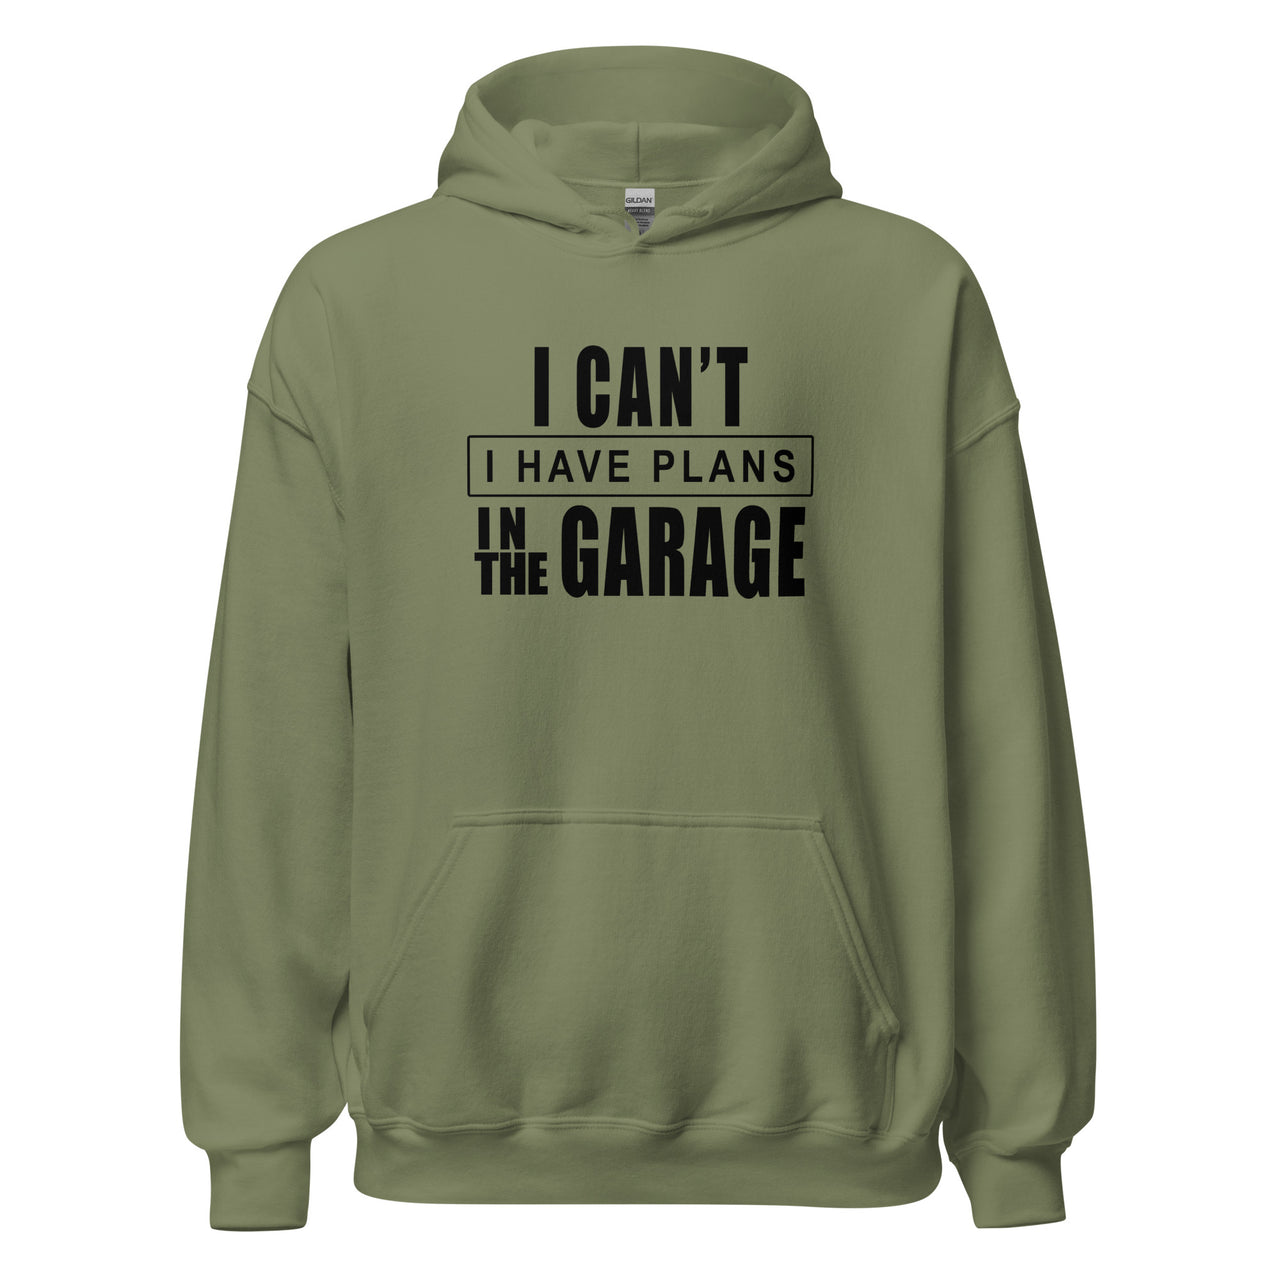 Funny Mechanic Sweatshirt Car Enthusiast Hoodie Gift Idea - I Have Plans In The garage - in military green